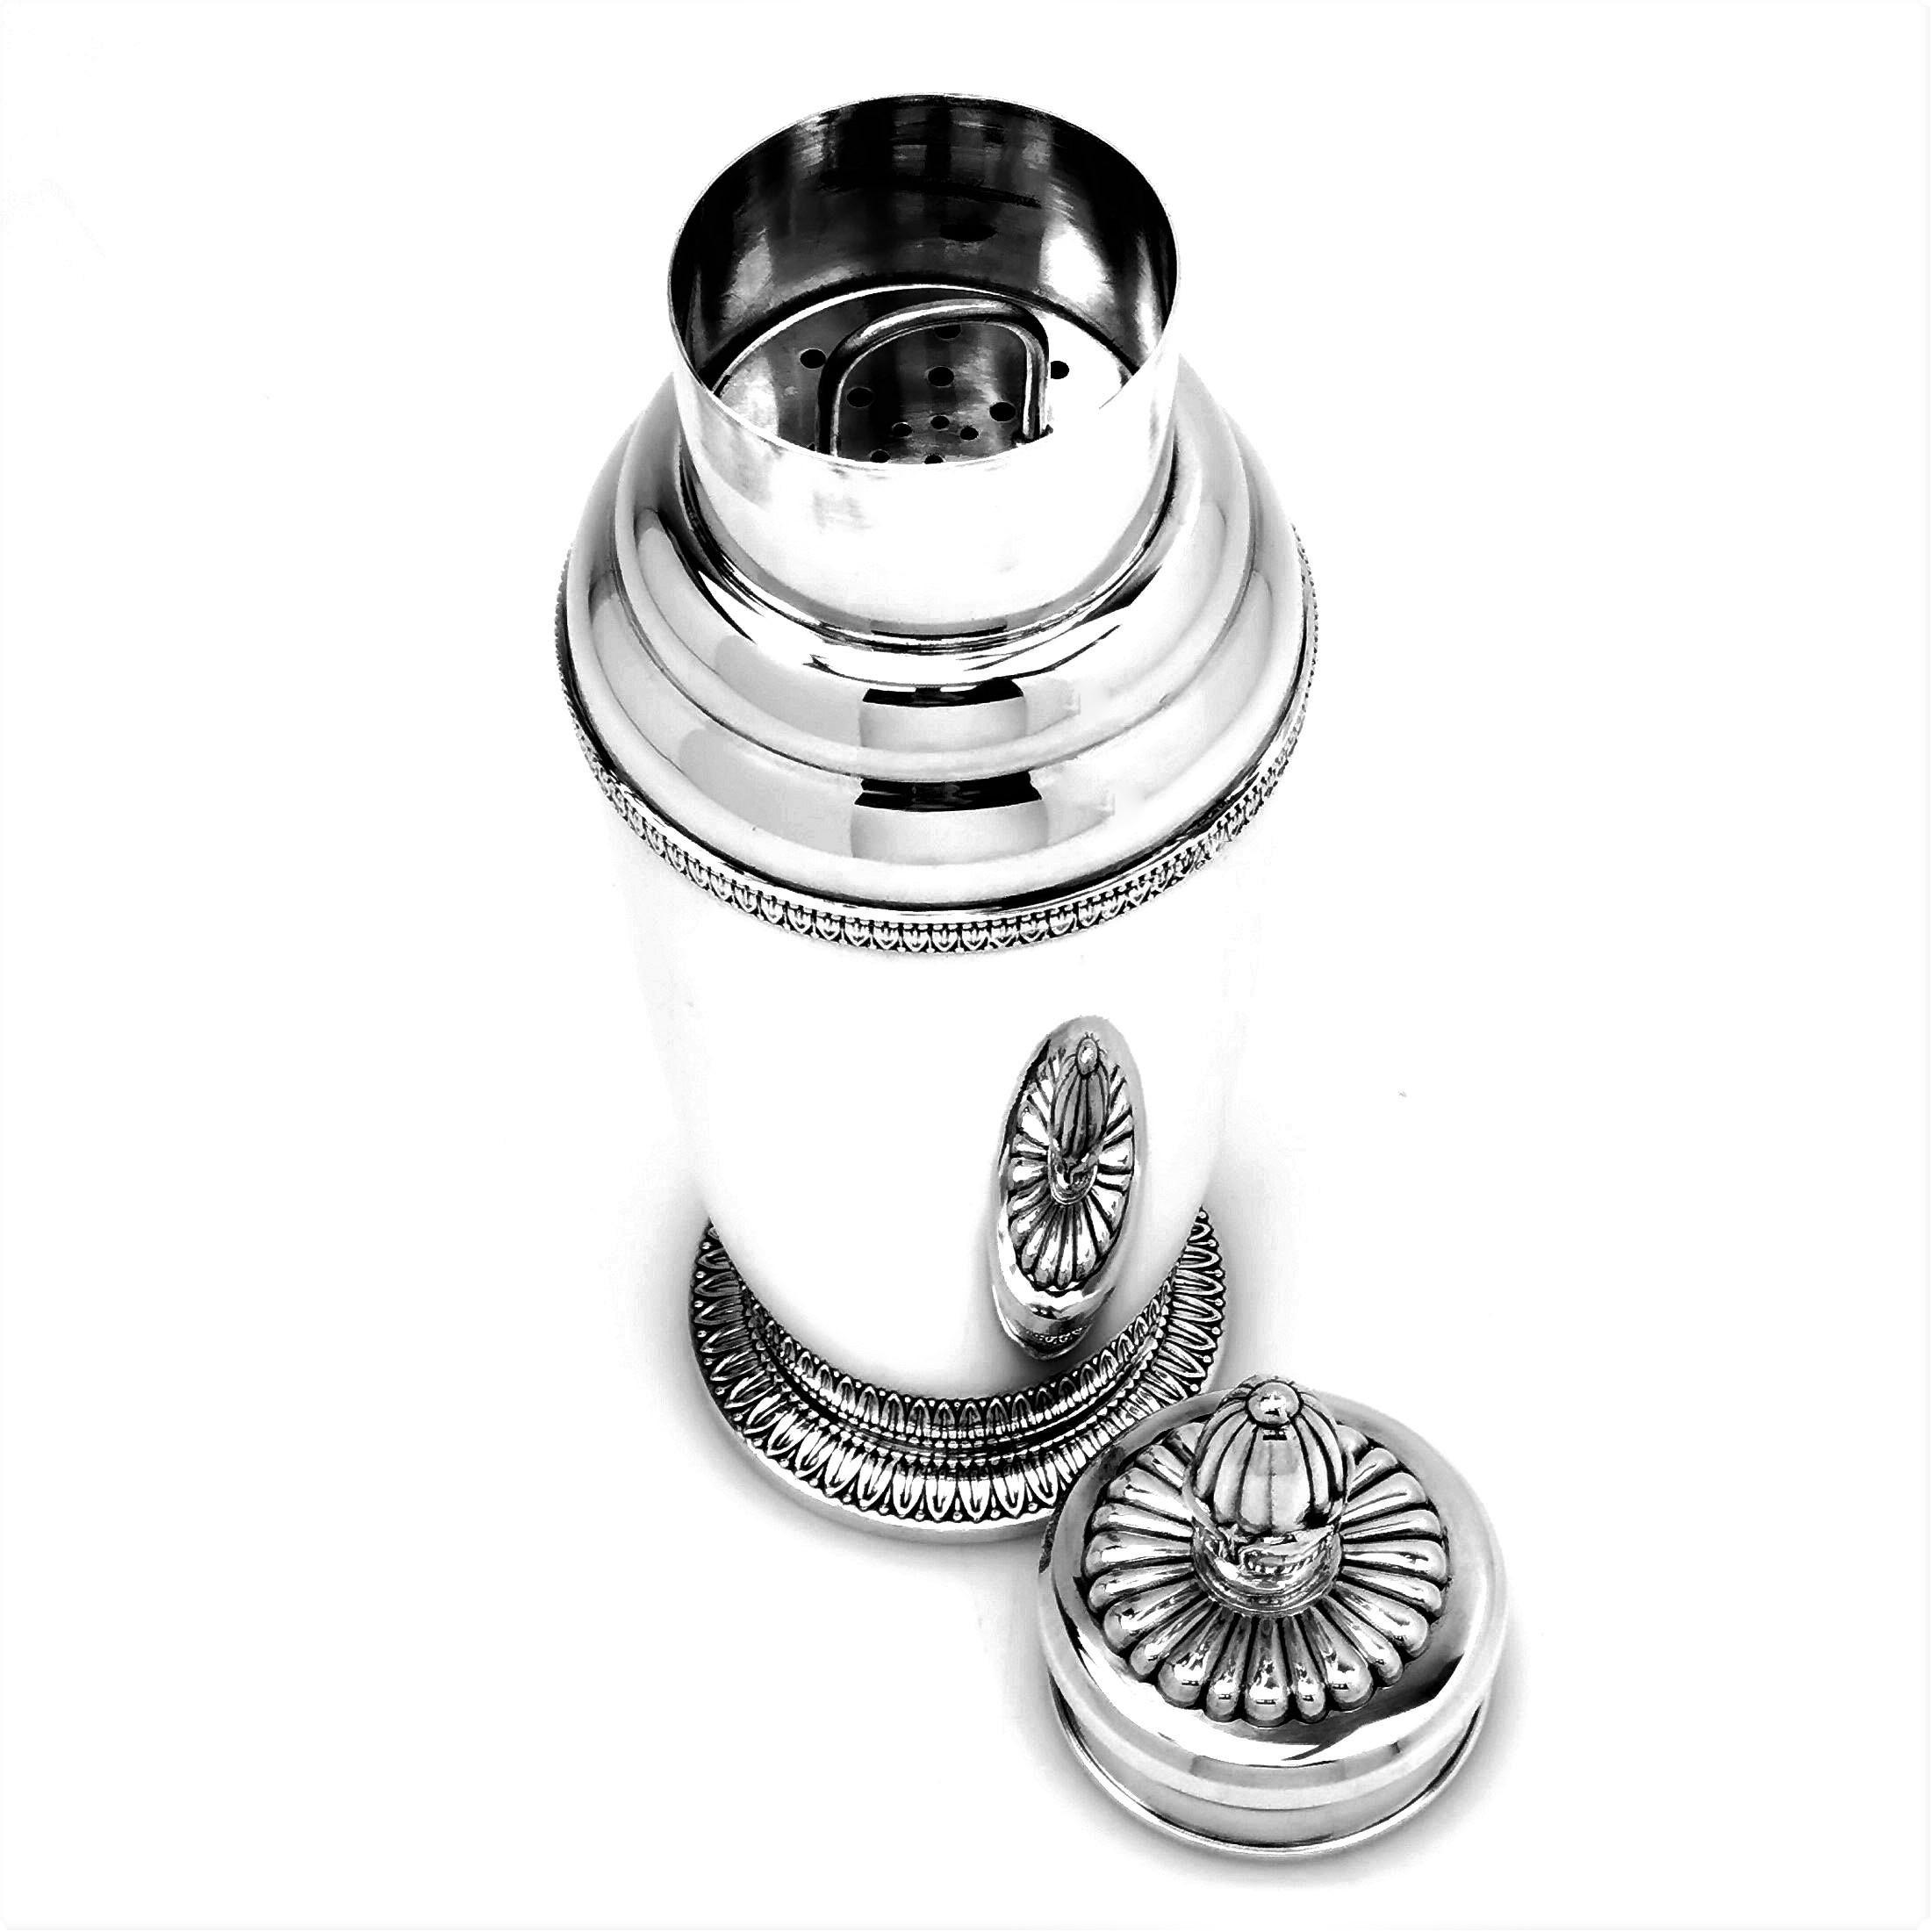 A gorgeous Italian vintage Solid Silver Cocktail Shaker with a plain polished body and embellished with a stylized leaf border on the spread foot and the shoulder. The lid has a decorative chased finial with a fluted pattern around the base.

Made